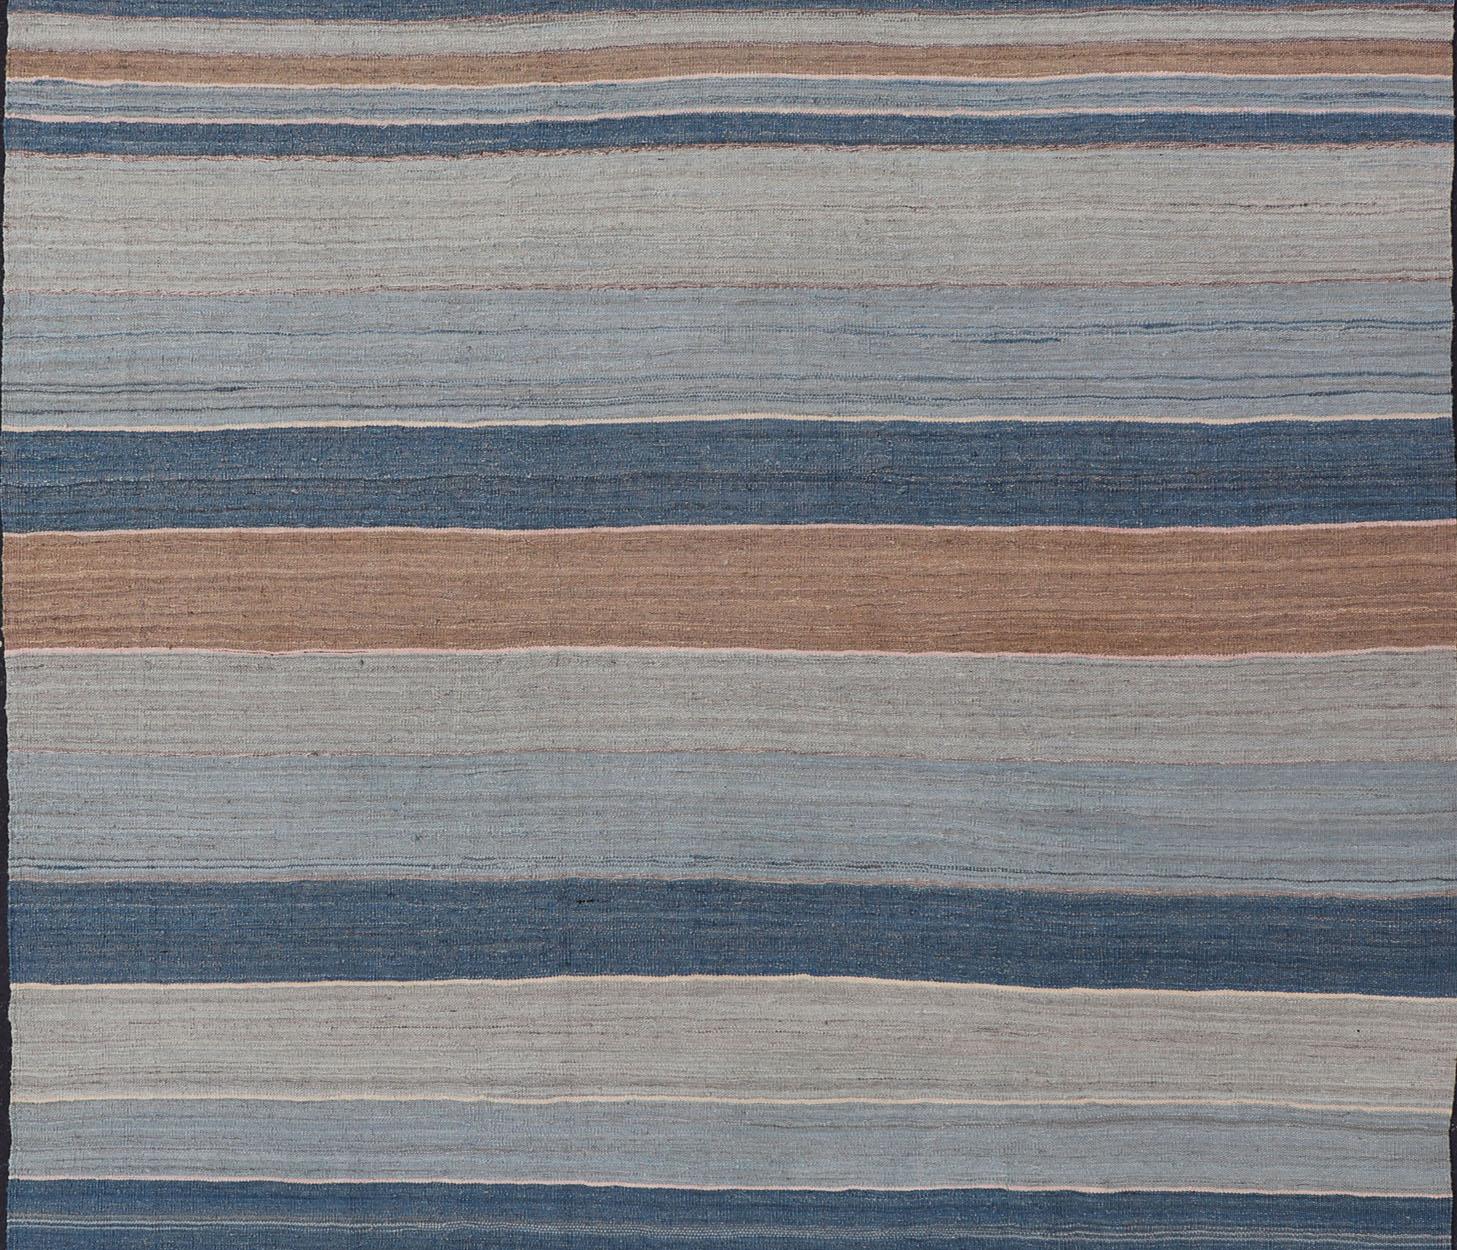 Afghan Modern Kilim Rug with Large Stripes in Shades of Blues, Brown, Gray For Sale